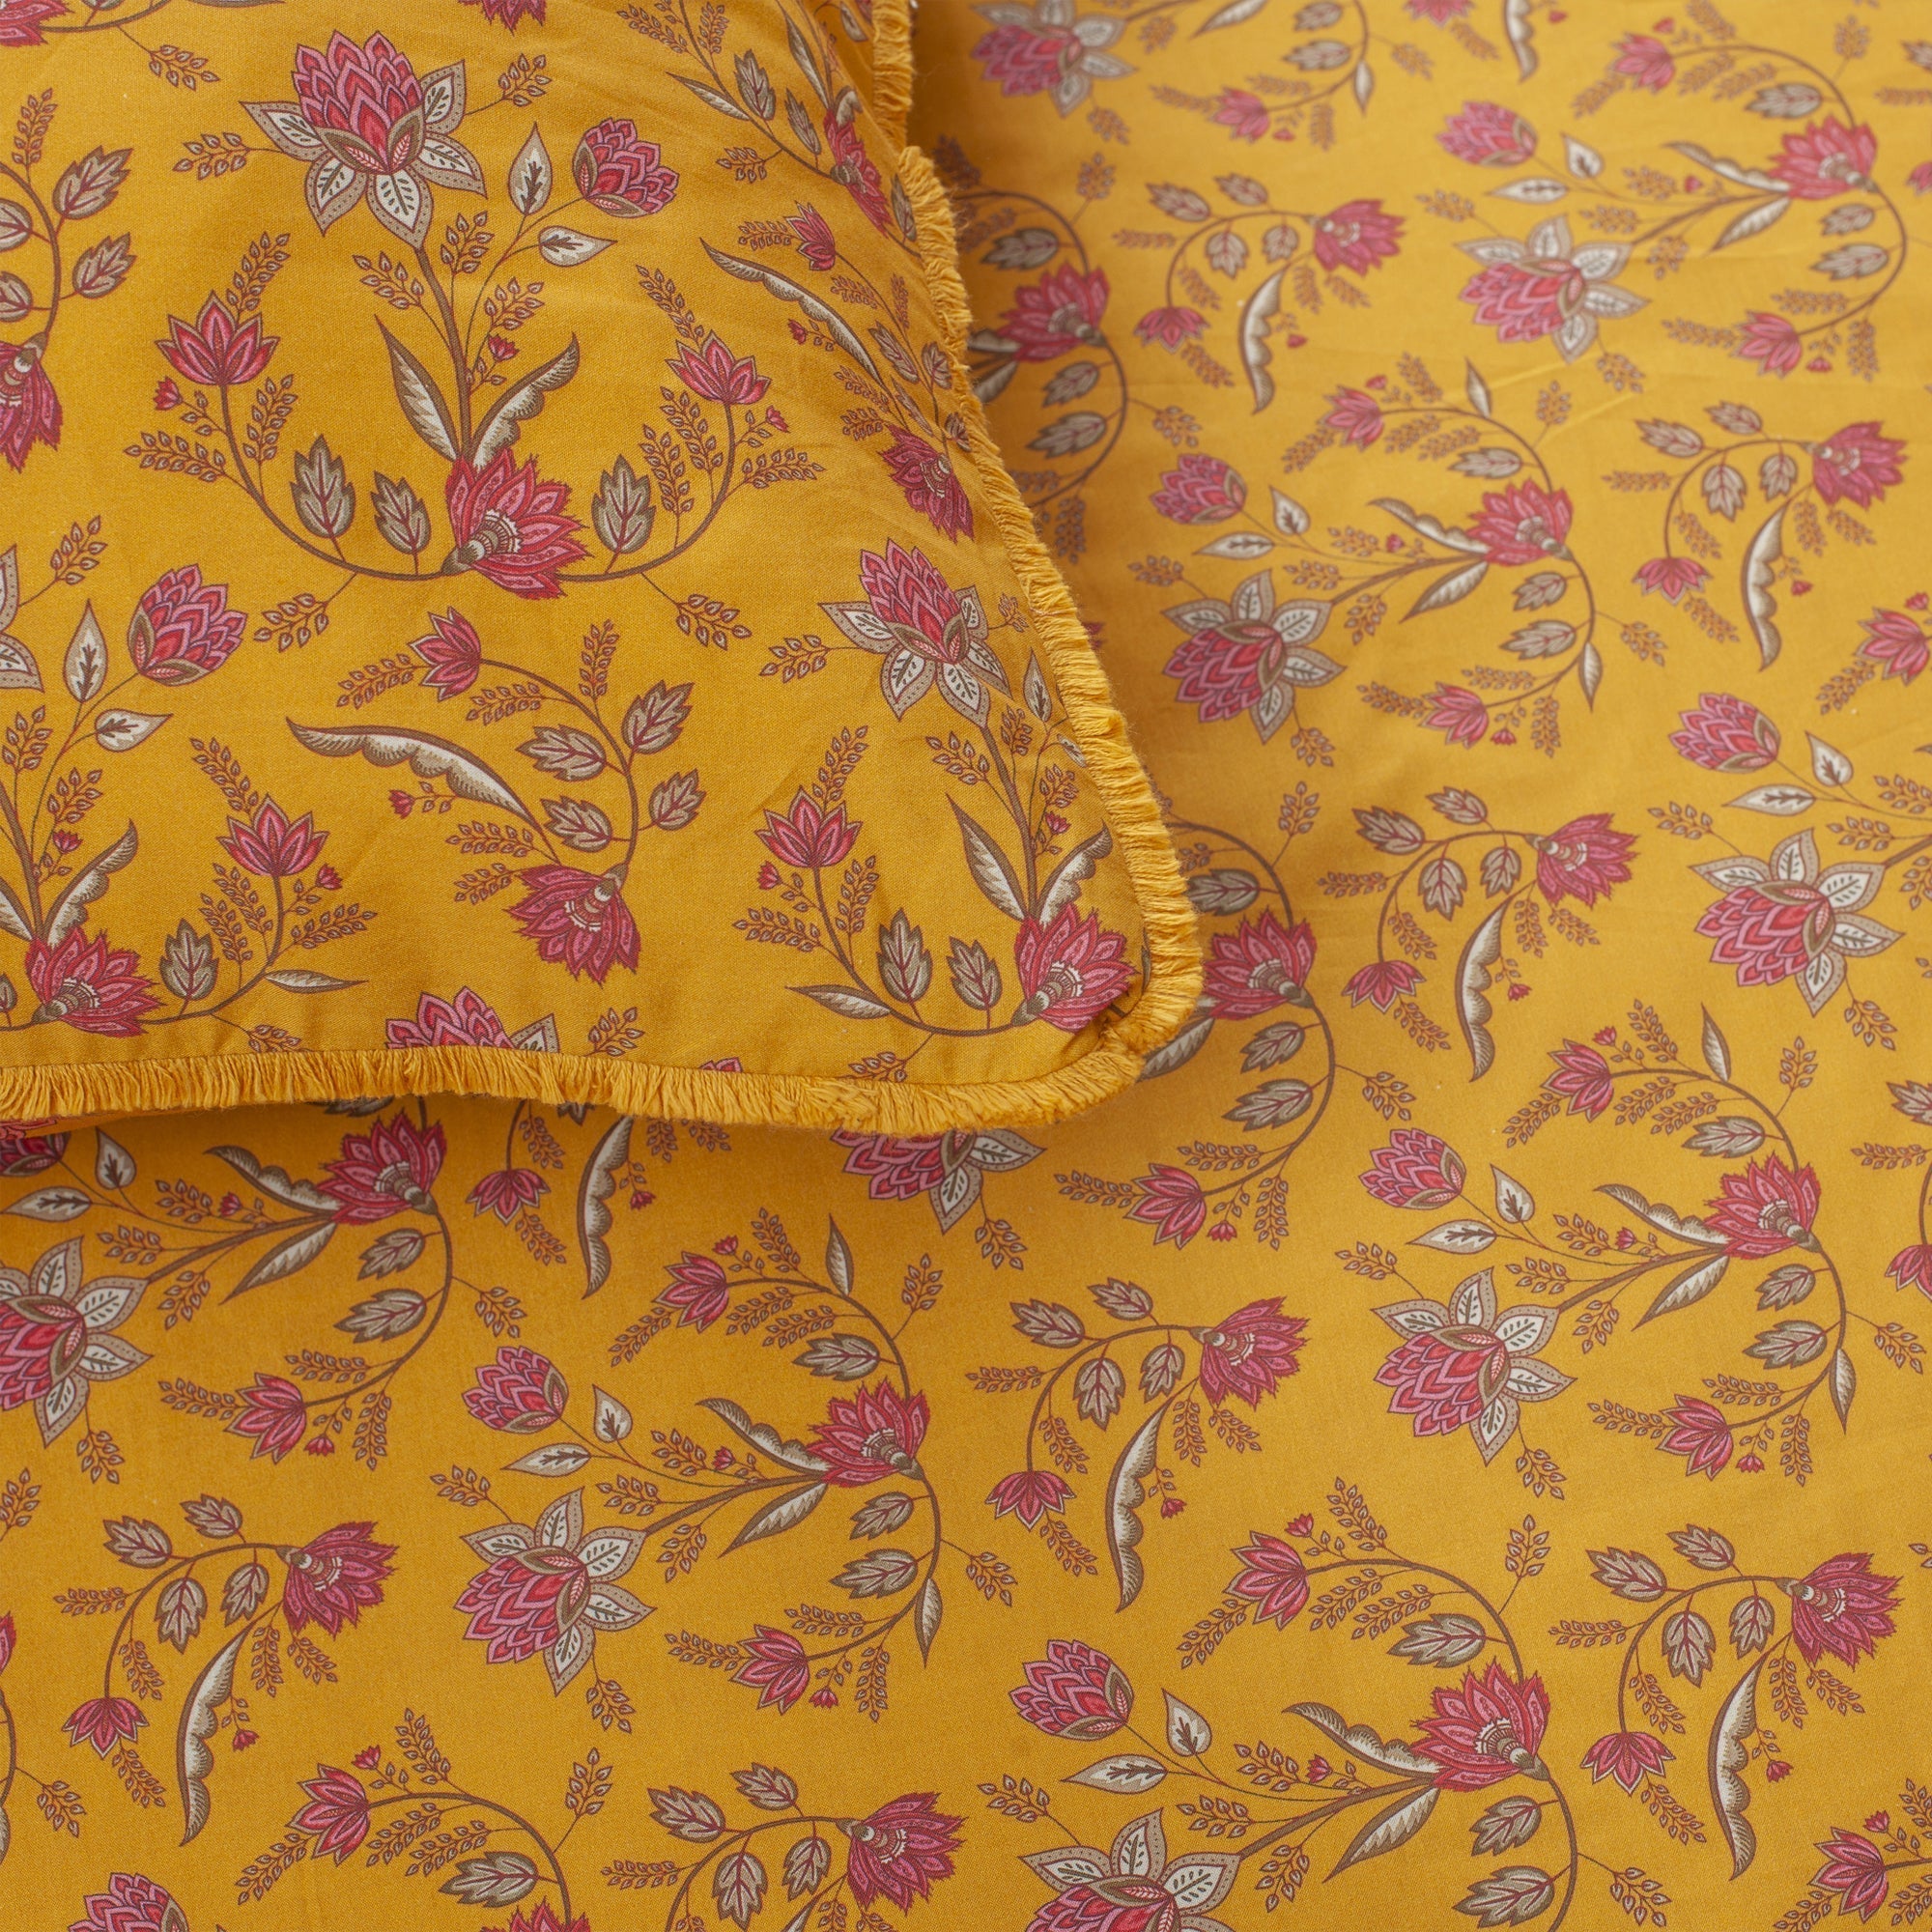 The Linen Company Bedding Chirpy Dawn Duvet Cover